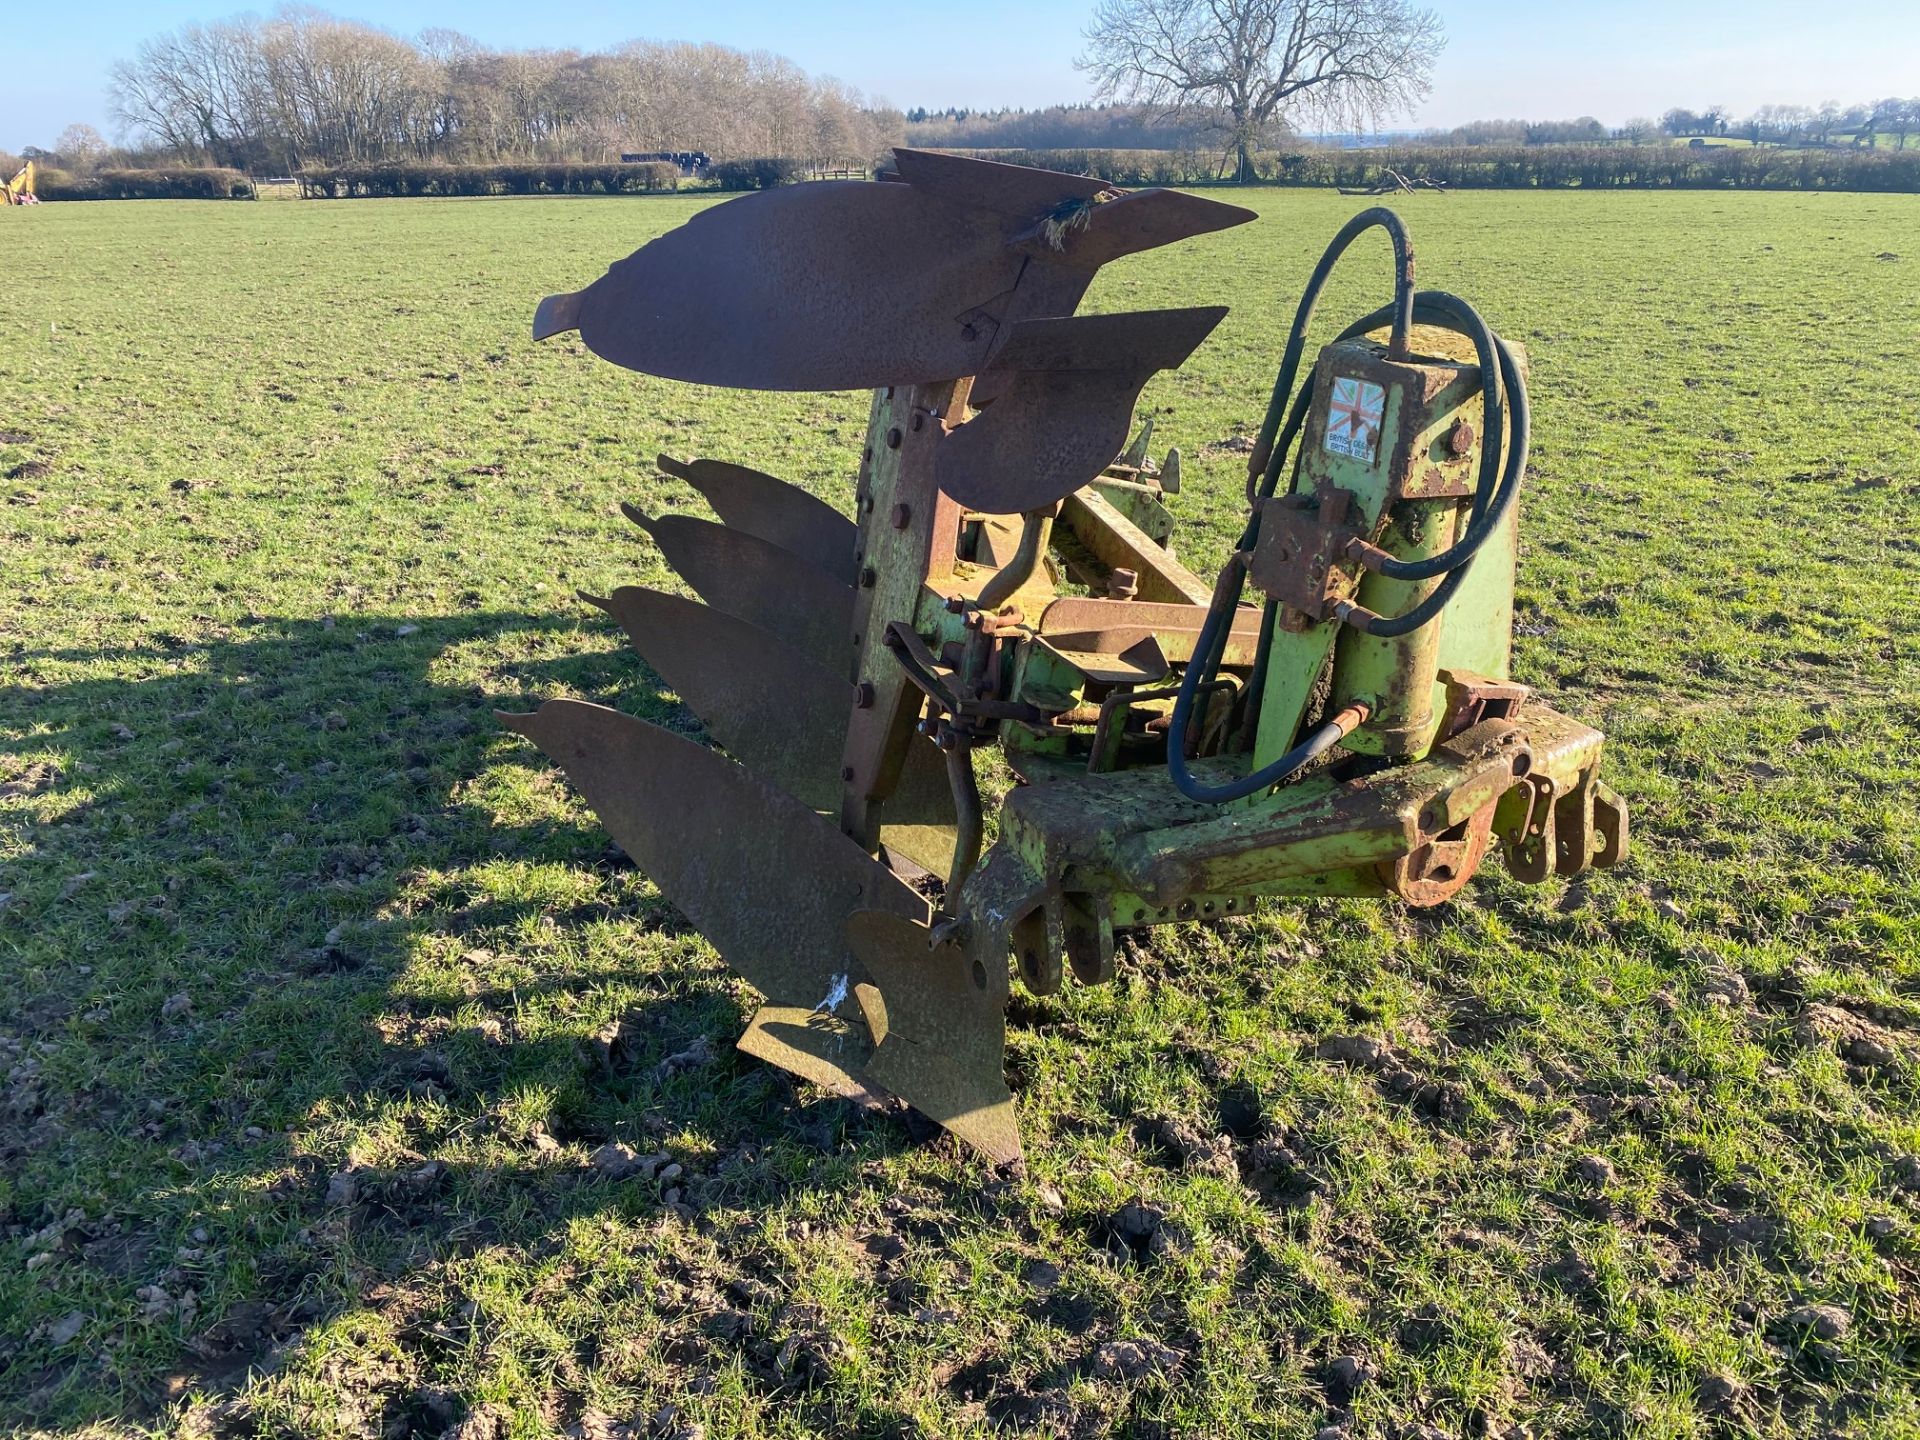 Dowdeswell dp 7 plough. Stored near Goring Heath, Reading. No VAT on this item. - Image 2 of 4